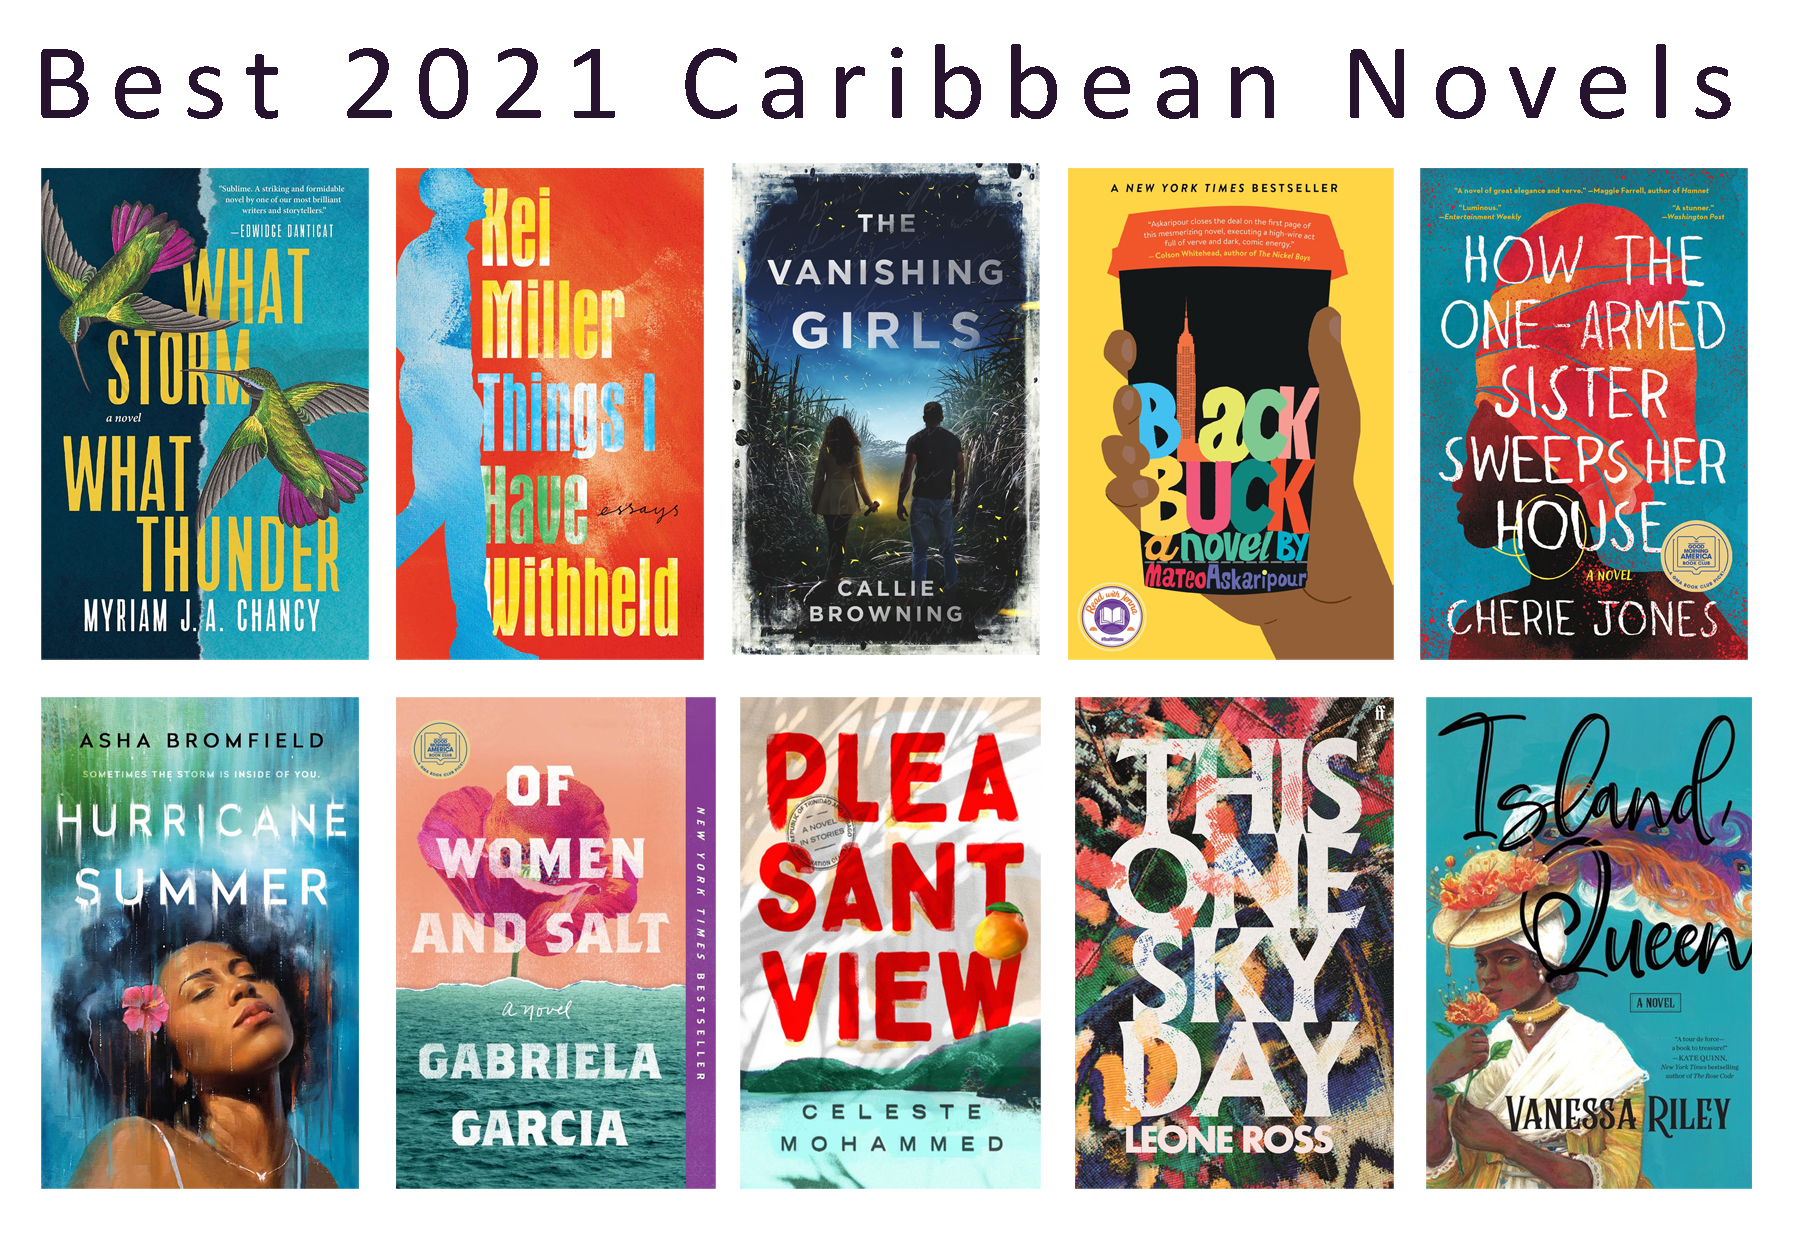 Top 10 books for 2021 by Caribbean authors Jakoproductions